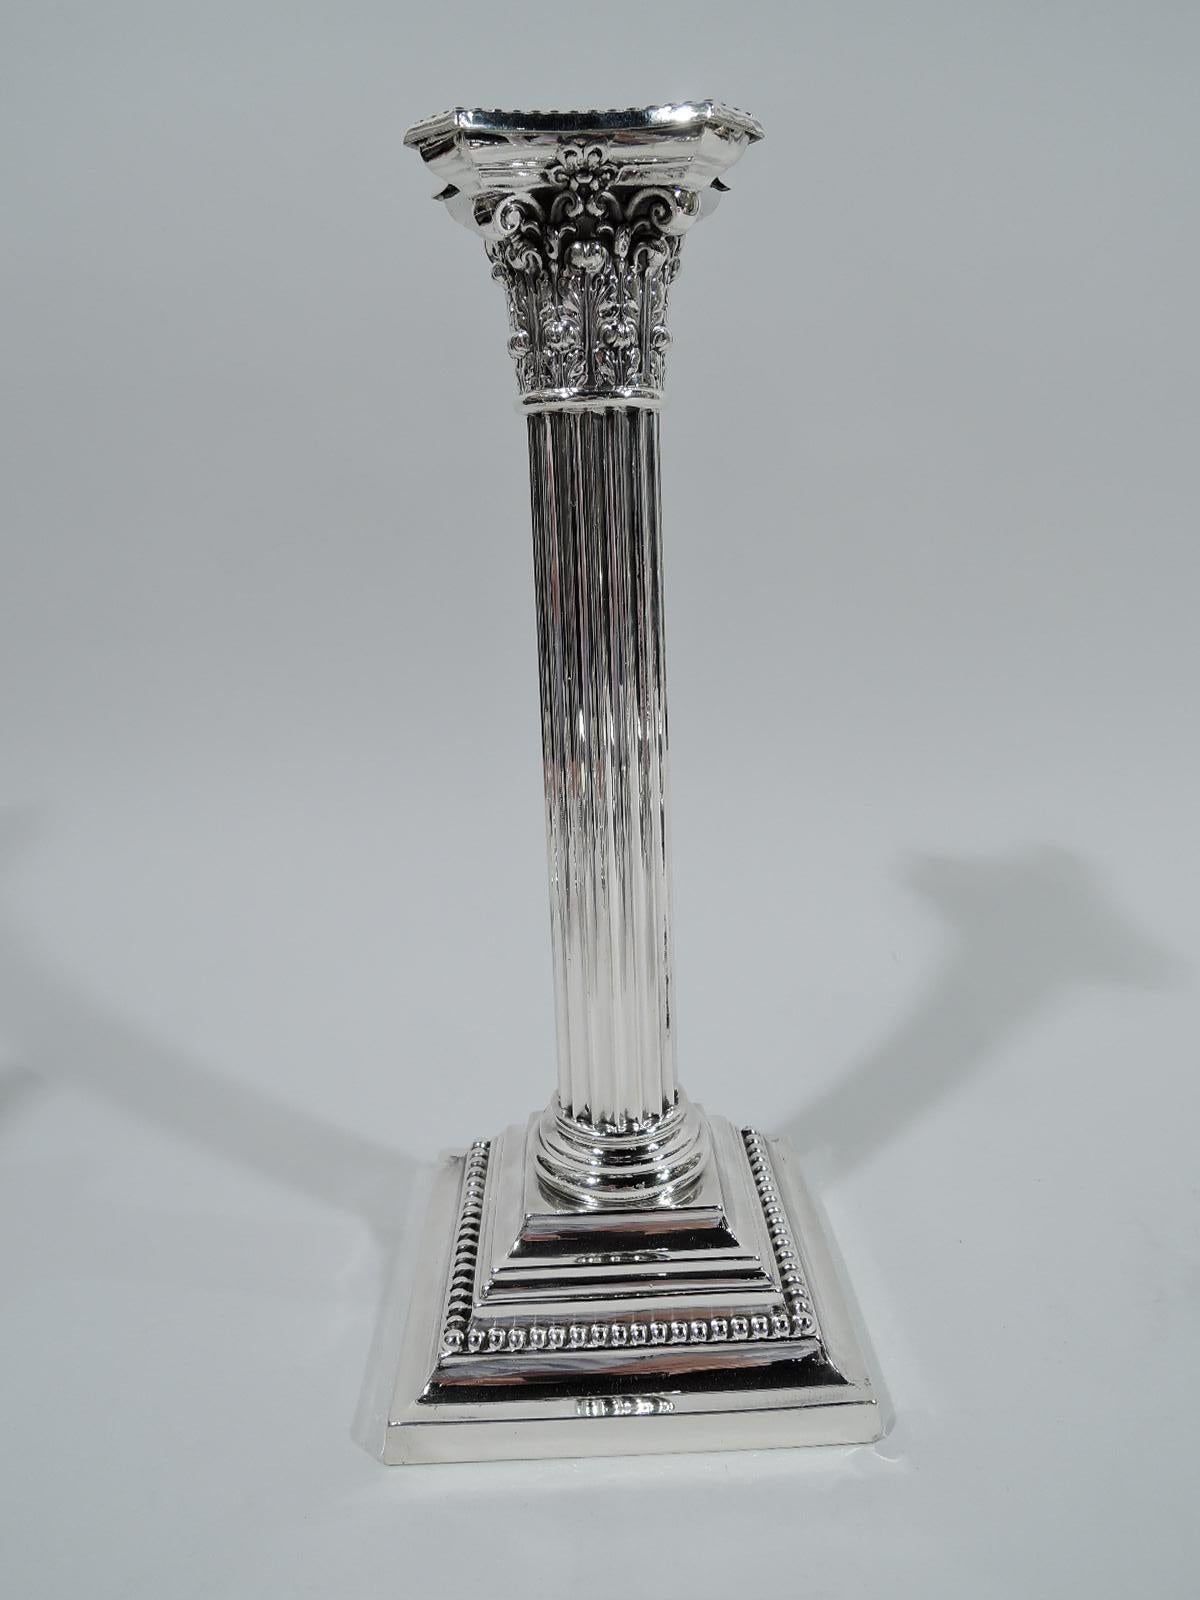 Pair of classical sterling silver candlesticks. Made by Gorham in Providence in 1947. Each: Fluted column and composite Corinthian capital. Bobeche detachable with chamfered and beaded rim. Stepped and square base also beaded. Fully marked including